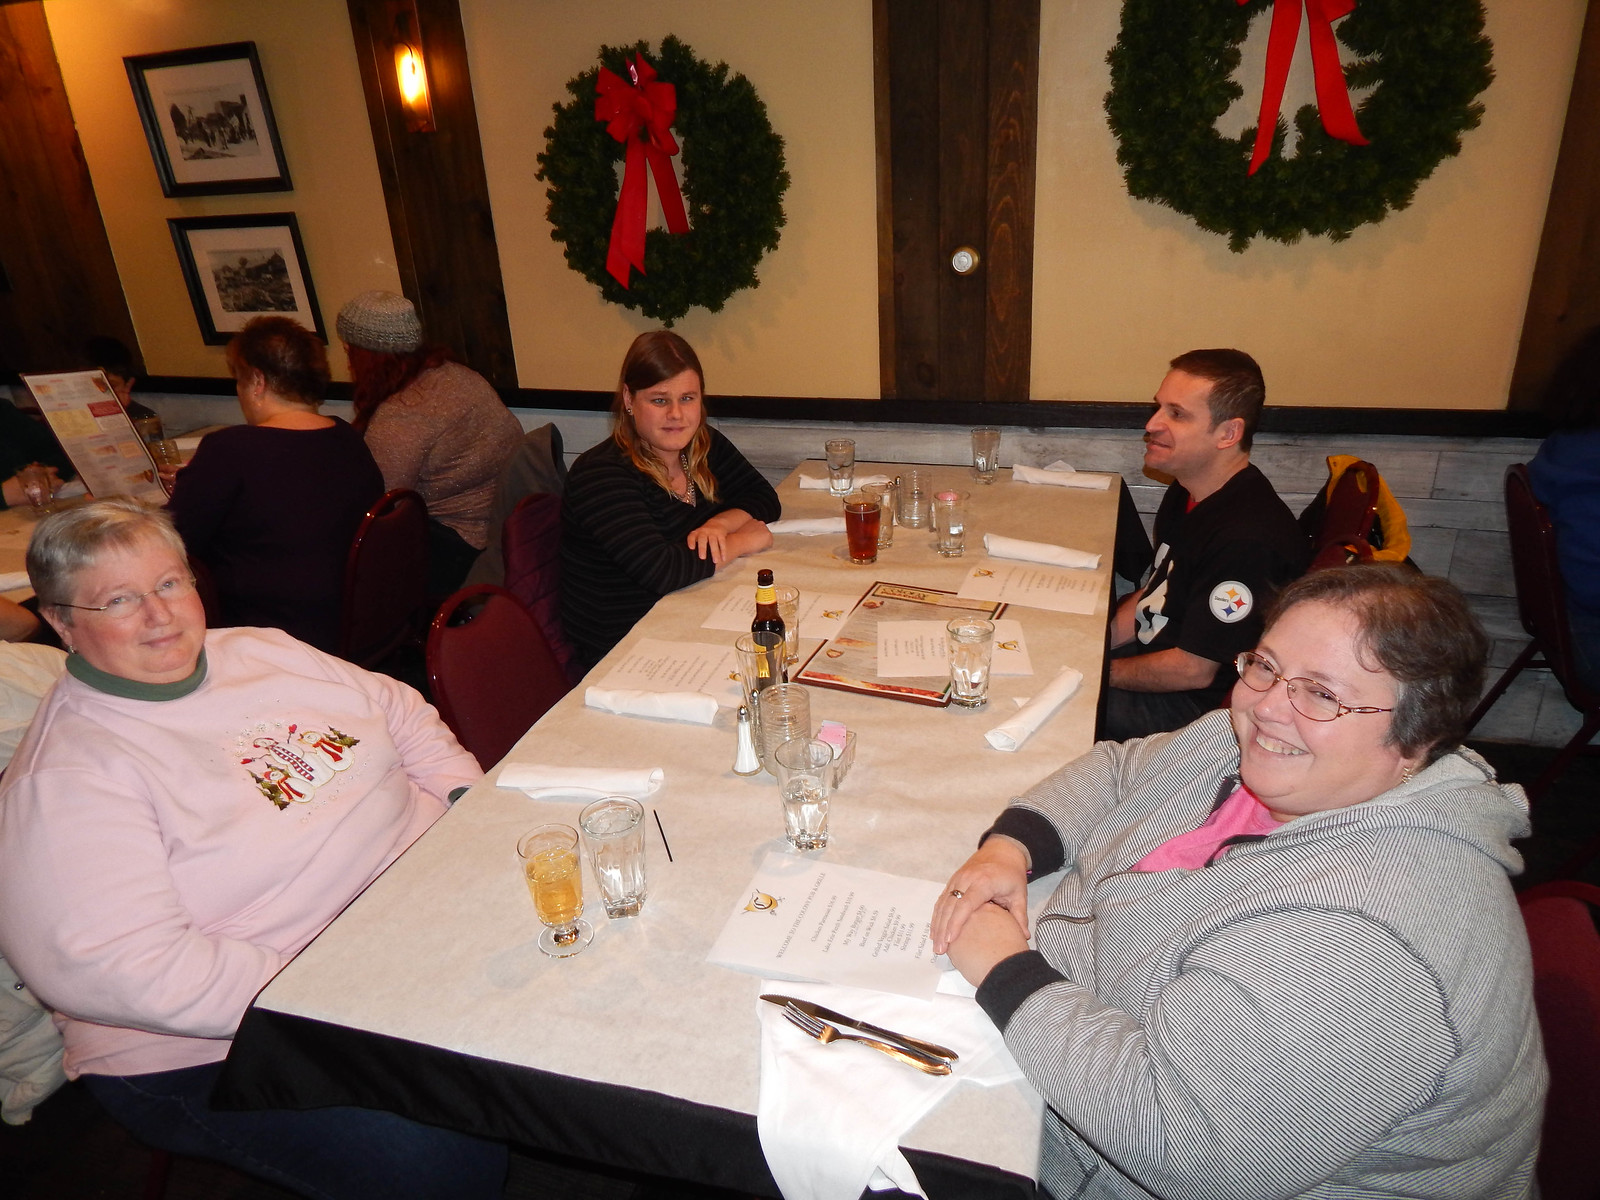 On Sunday, January 8, 2017, LBT Women of Erie held their annual Holiday Dinner at The Colony Pub & Grille, 2670 W 8th St, Erie PA. In addition to great times and great company, there was also a gift exchange and donations were collected for the Second Har